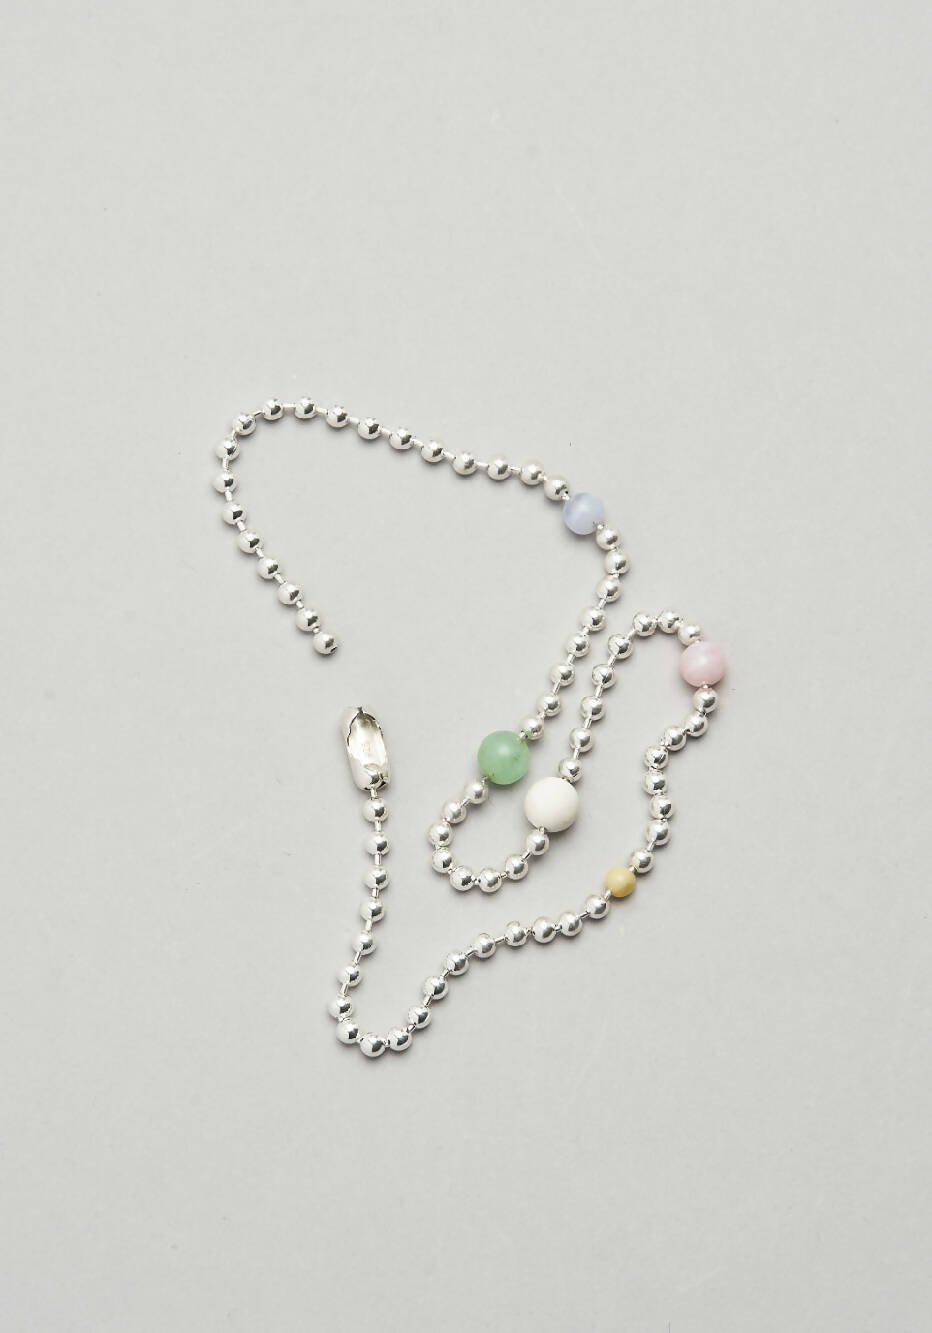 Mussels and Muscles Mini Orbits Color Necklace